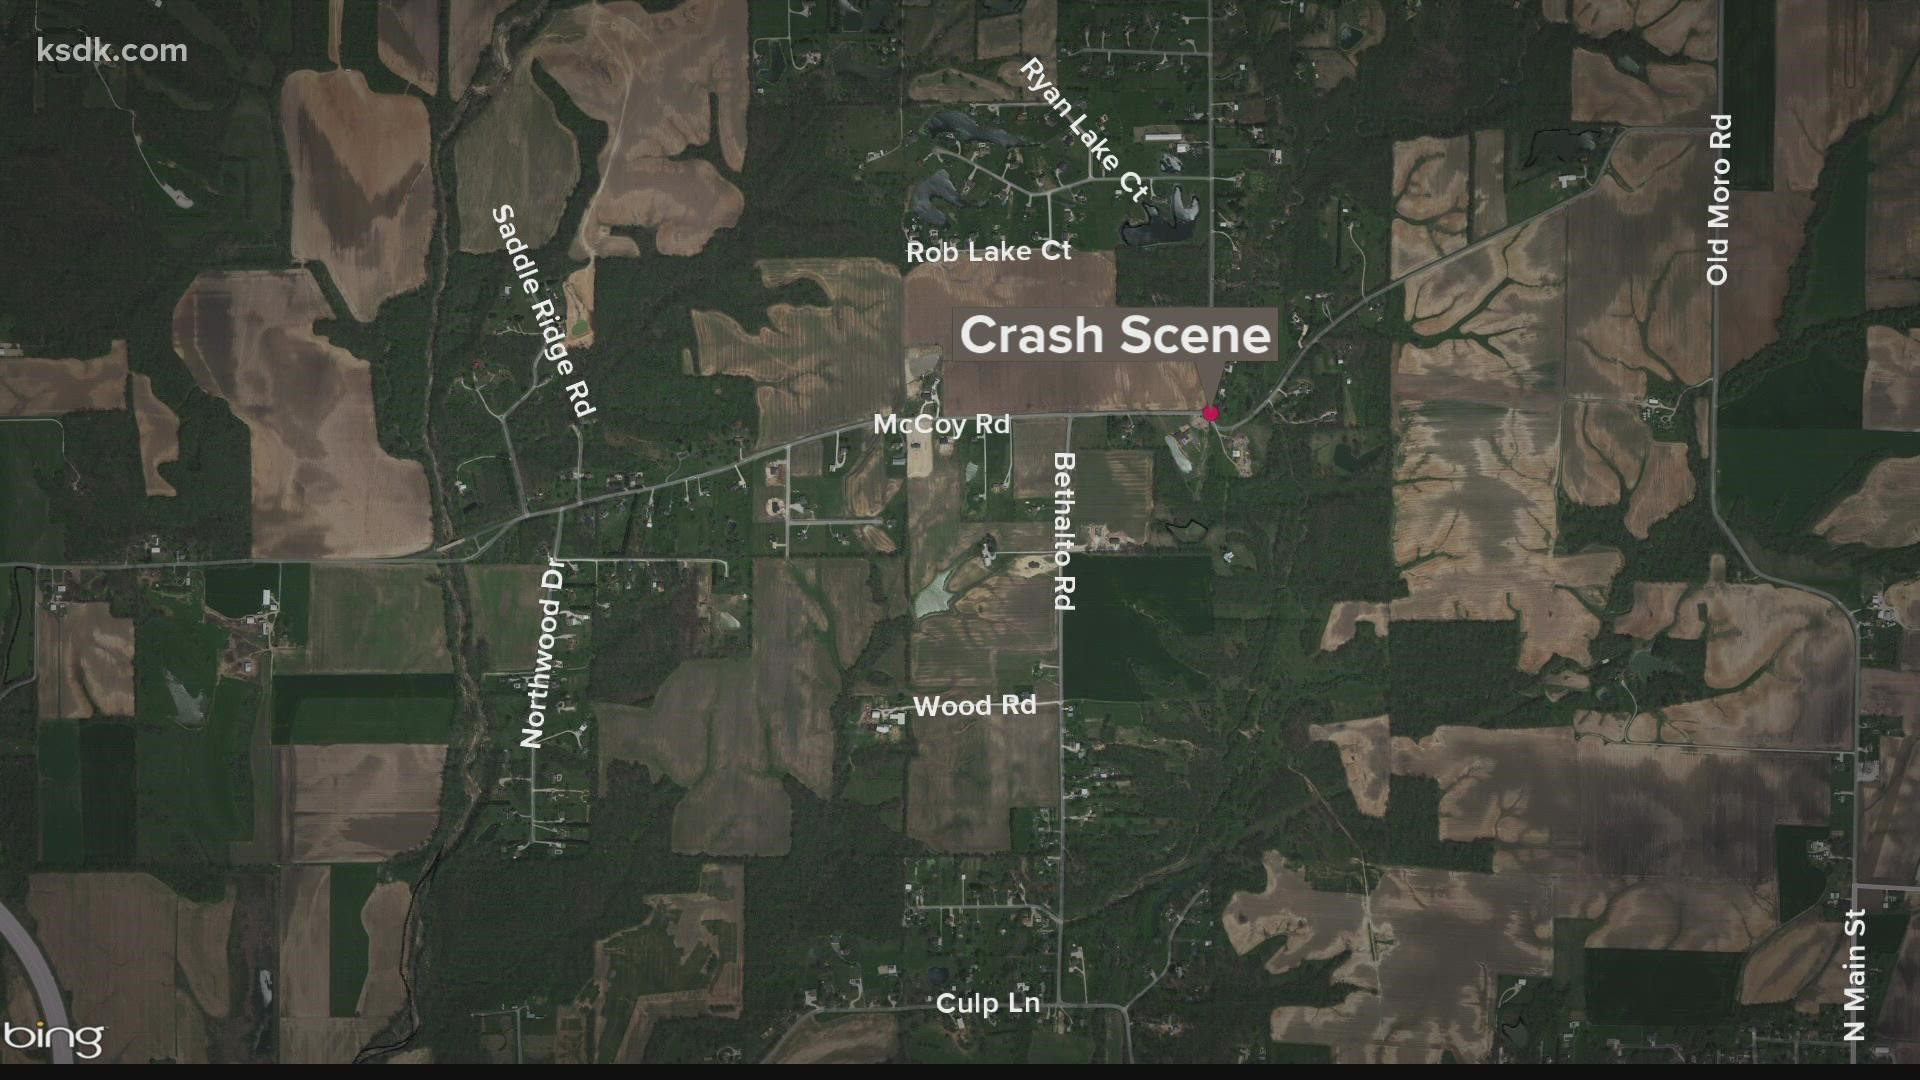 It was a two-car accident that happened outside of Bethalto city limits, near Fosterburg.